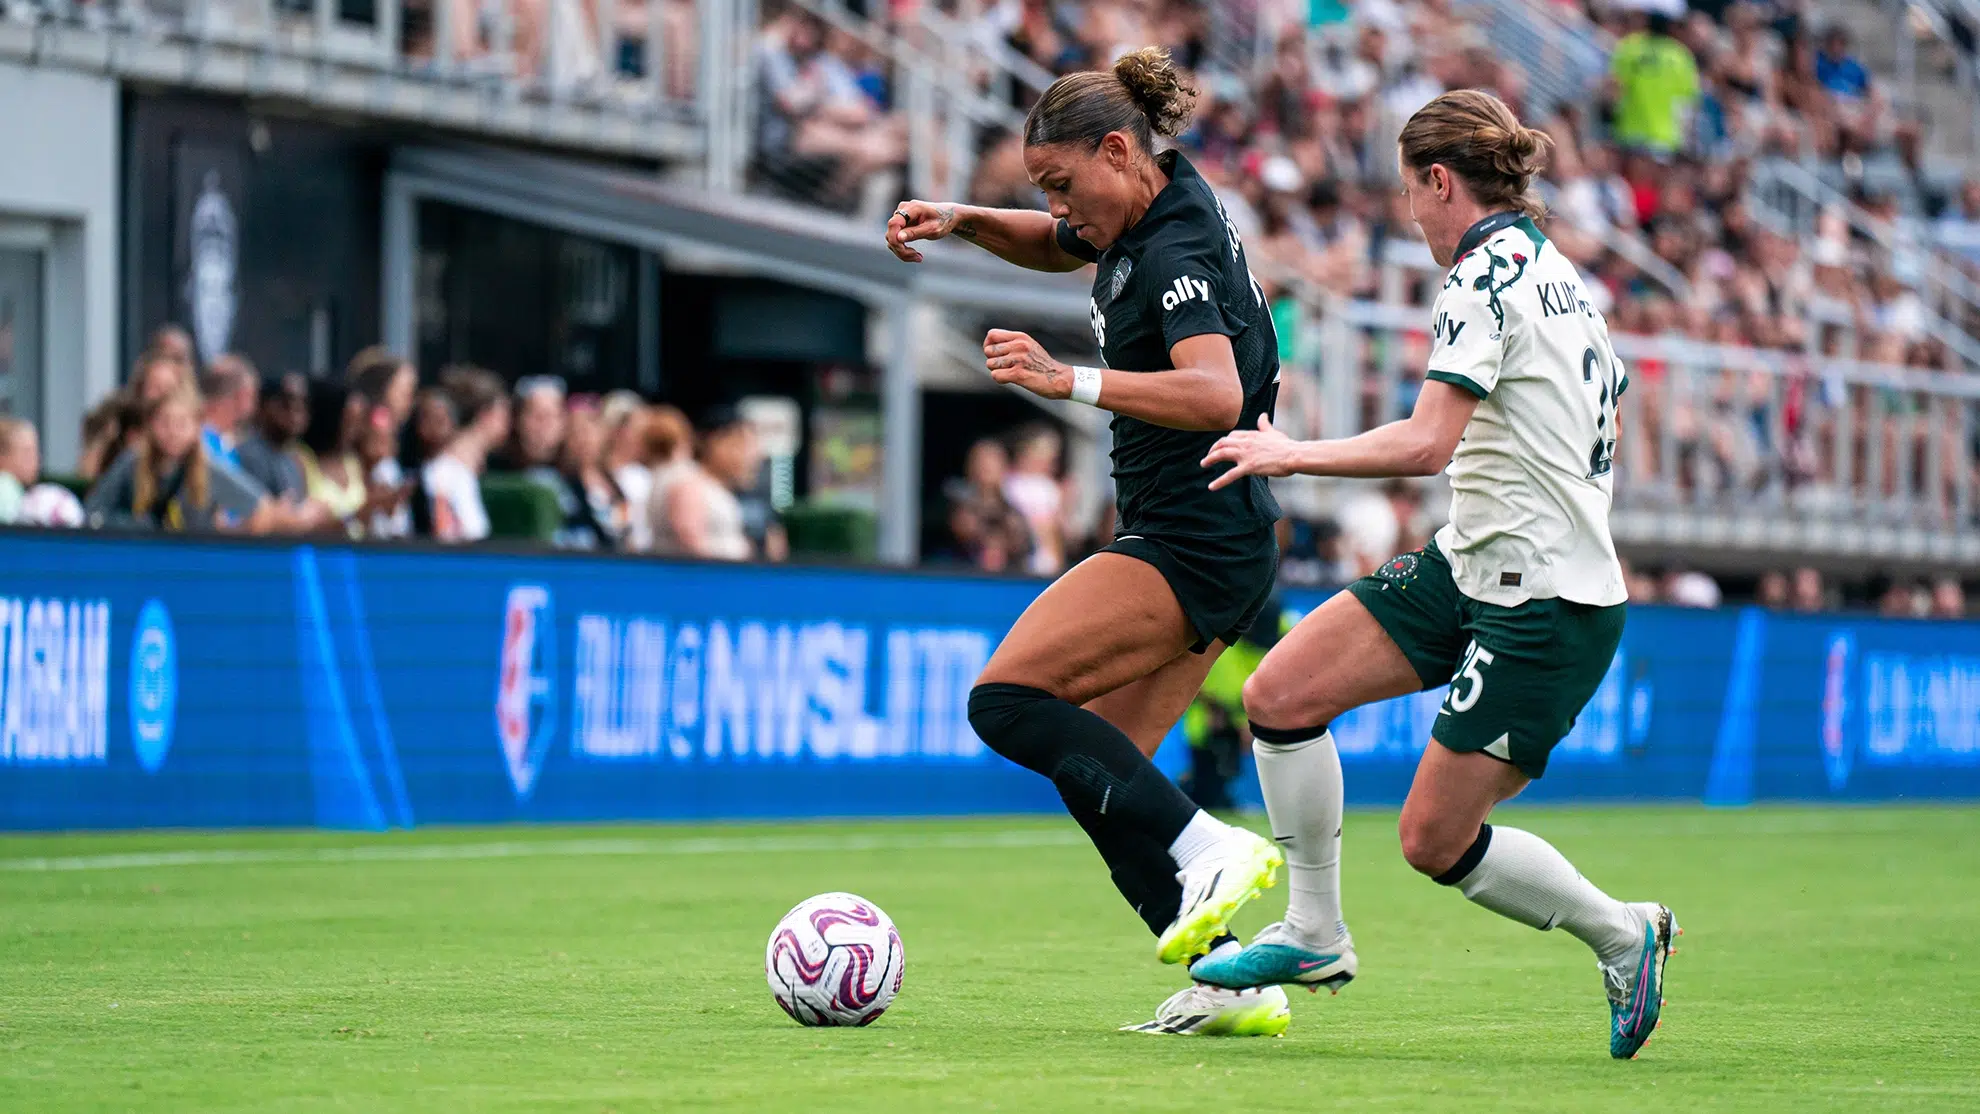 Trinity Rodman in an all black uniform dribbles the ball and works to keep it away from a defender in a white top, green shorts and white socks.